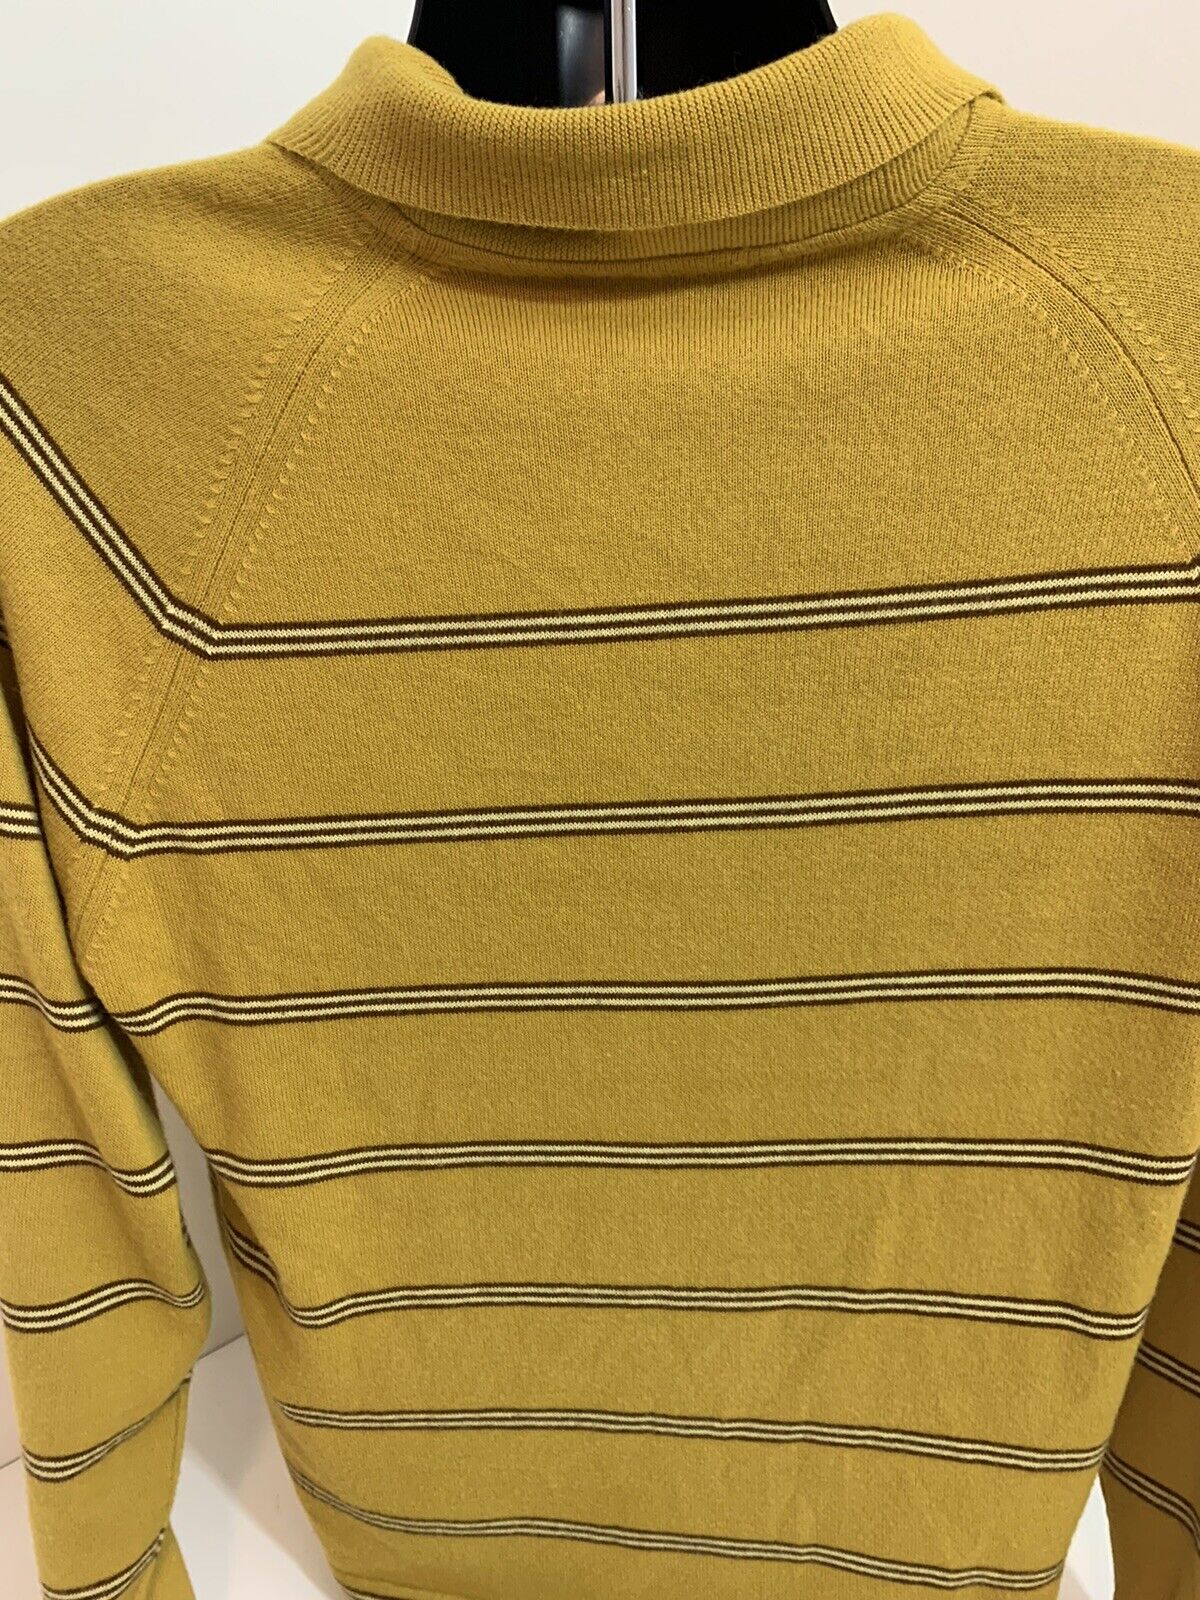 Vintage Collared Striped Sweater Tan Brown 60s 70… - image 5